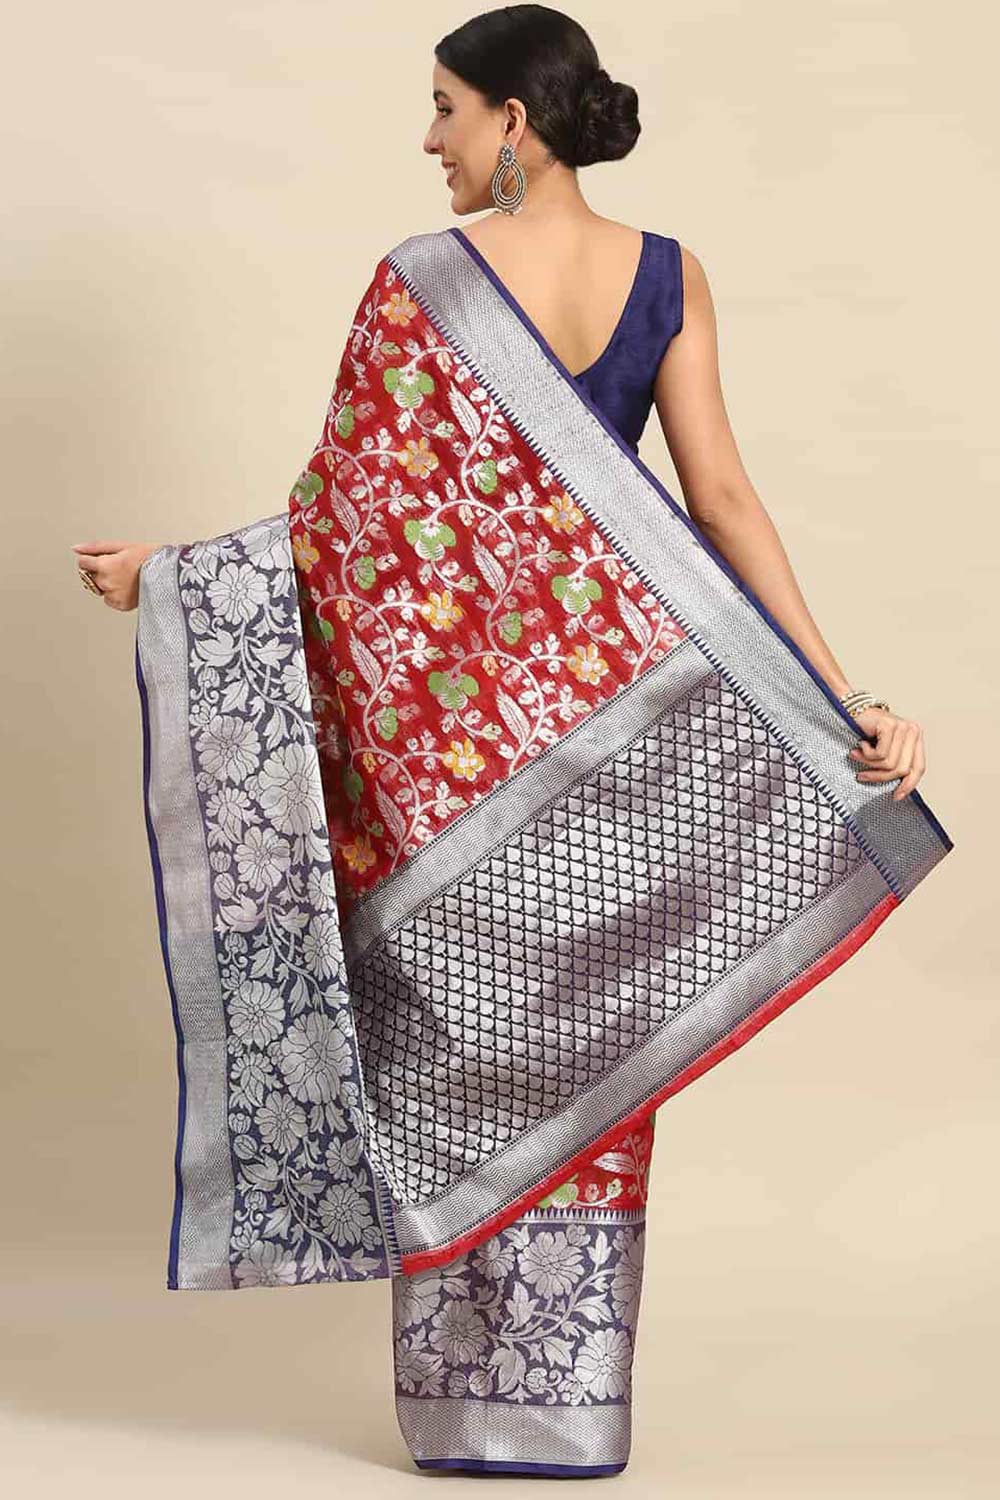 Shop Anvi Red Art Silk Floral Banarasi One Minute Saree at best offer at our  Store - One Minute Saree